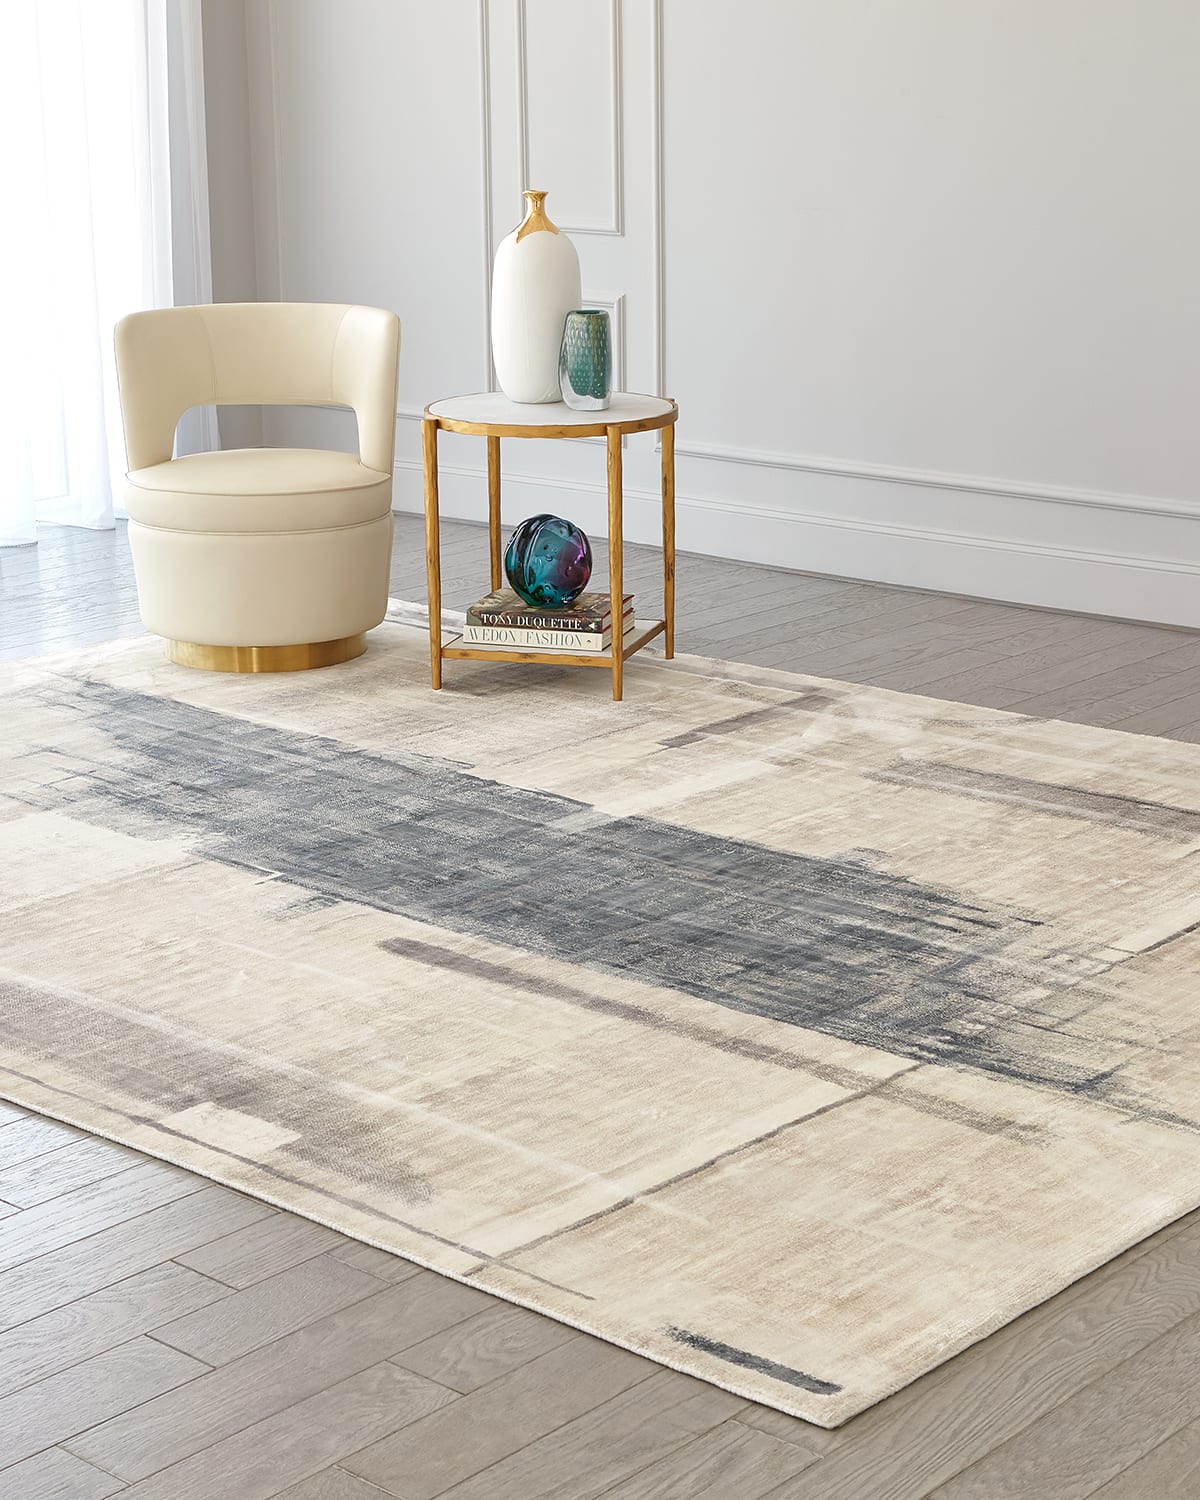 George Sellers For Global Views Art Hand-woven Rug, 10' X 14' In Gray